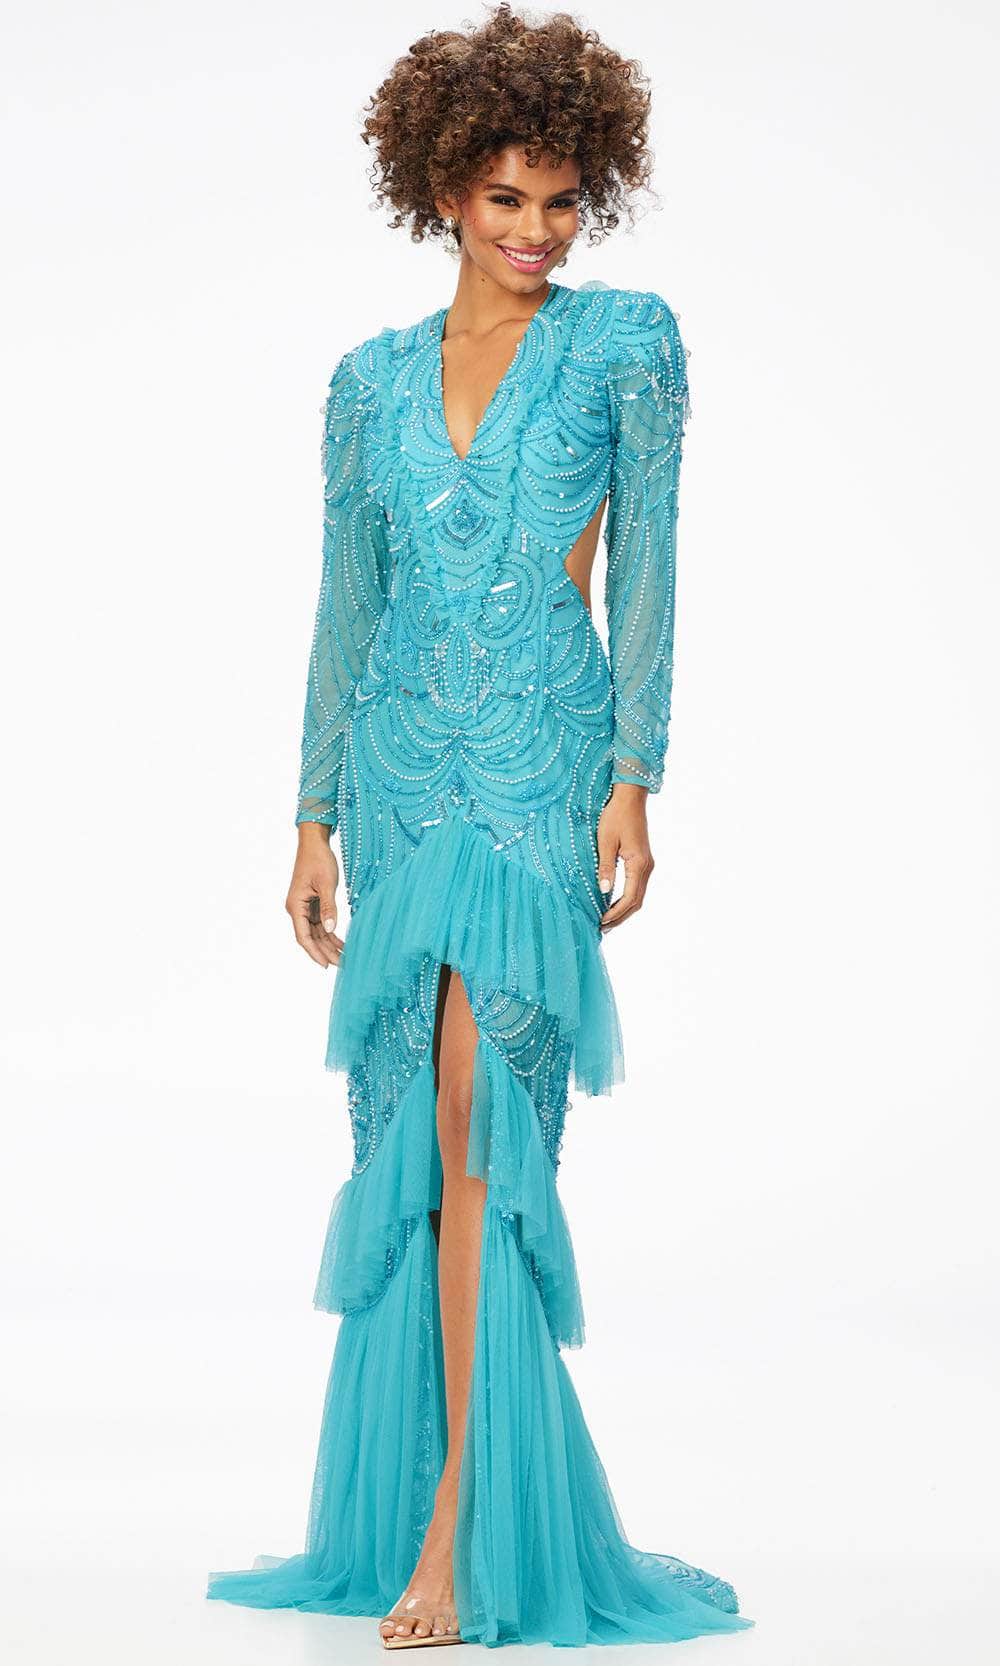 Ashley Lauren 11199 - Tulle Ruffled Evening Dress Special Occasion Dress 0 / Neon Blue